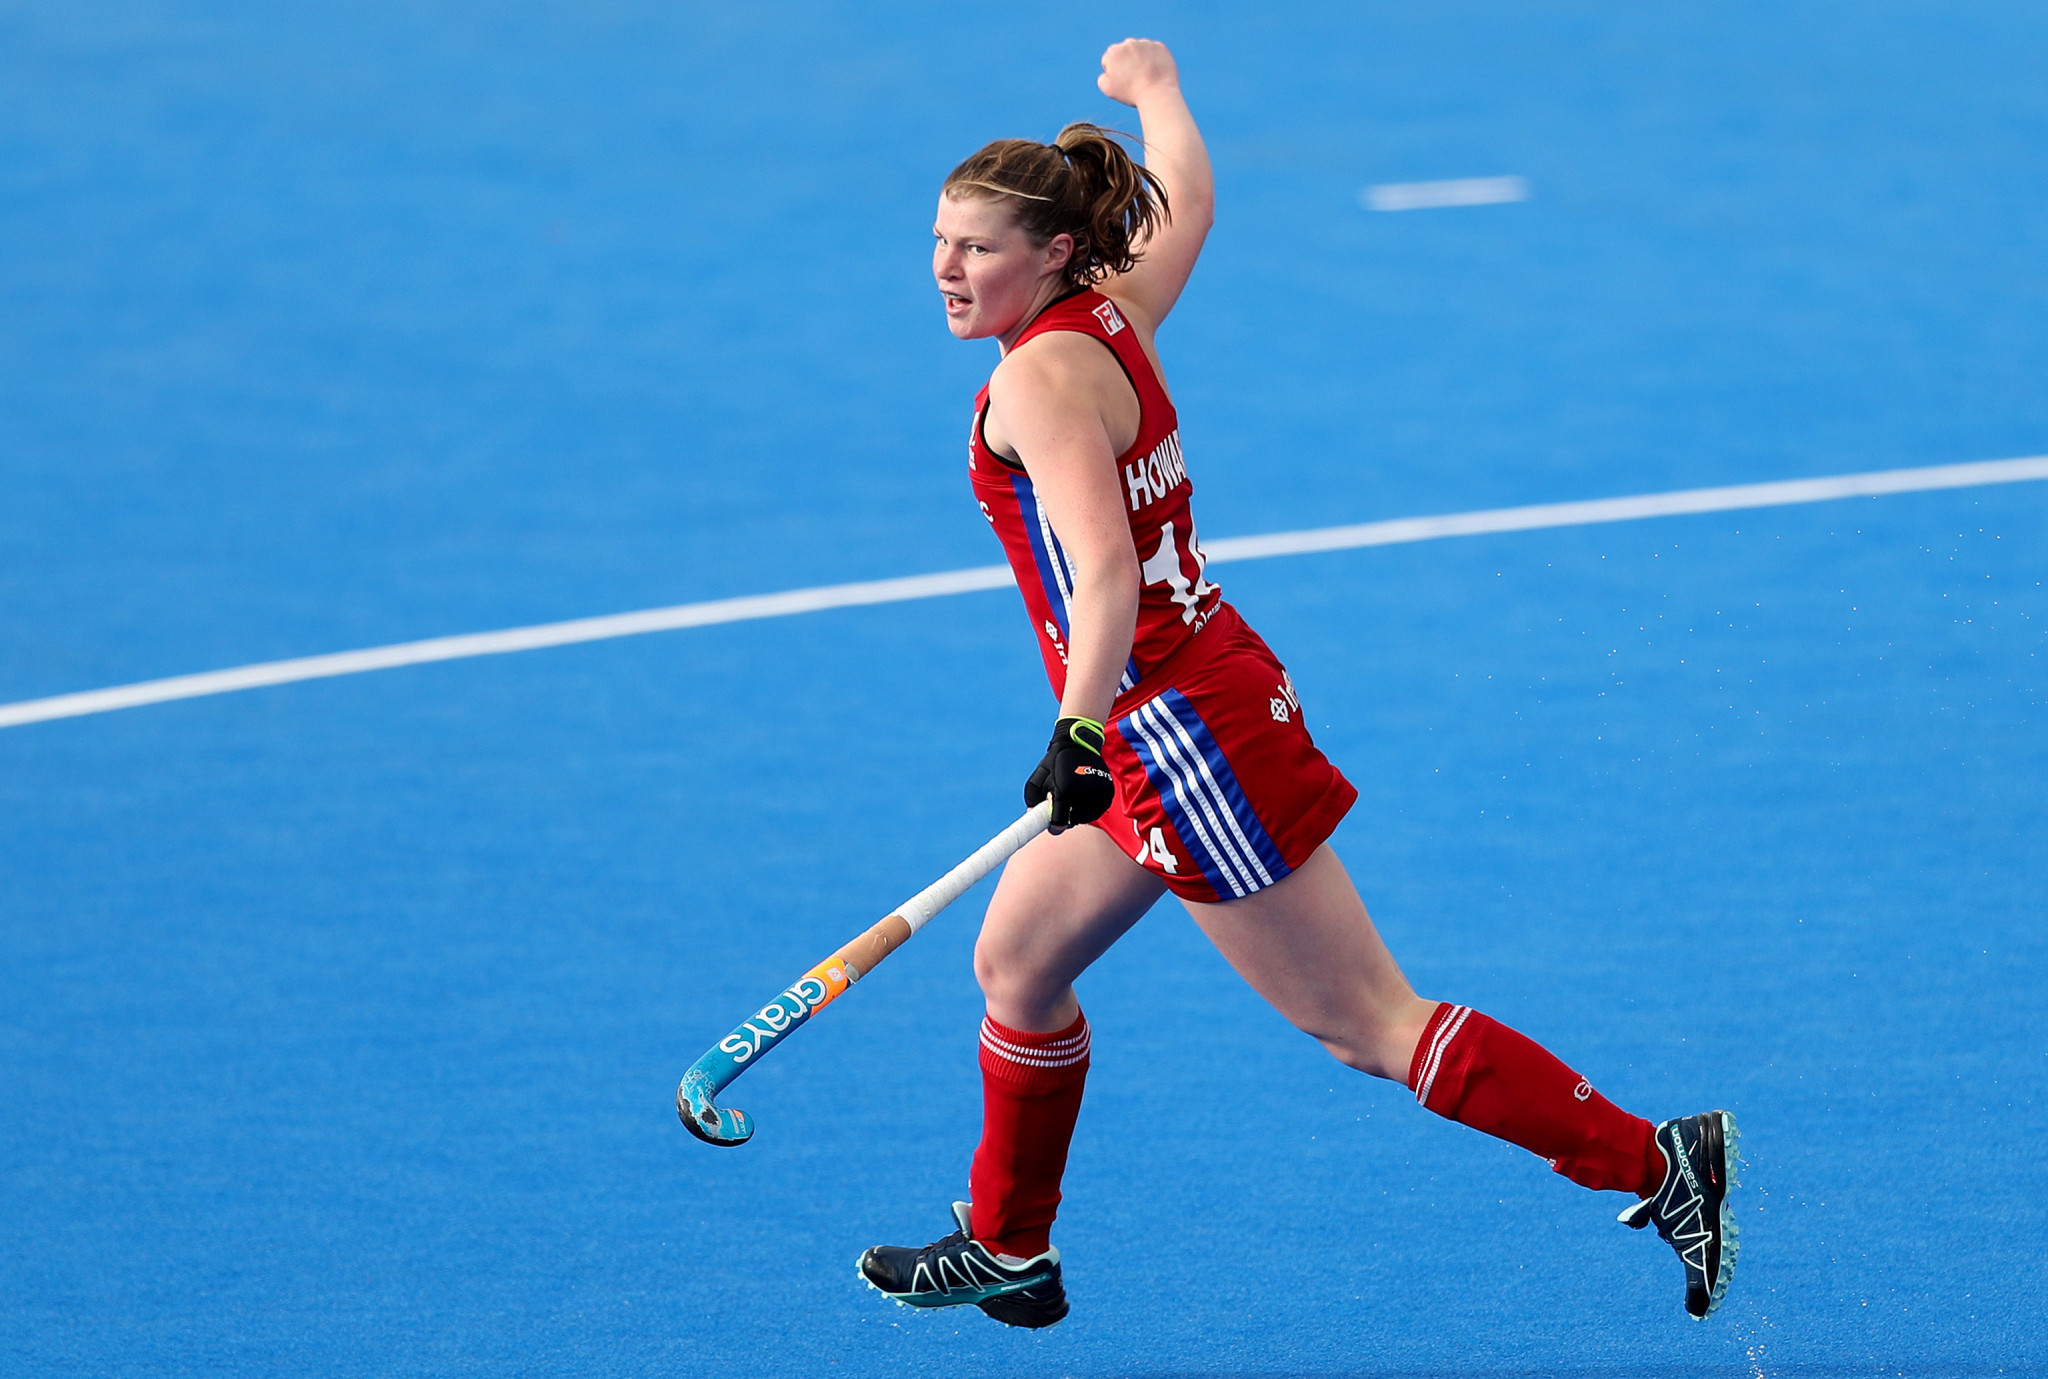 Double delight for England against Belgium at FIH Pro League